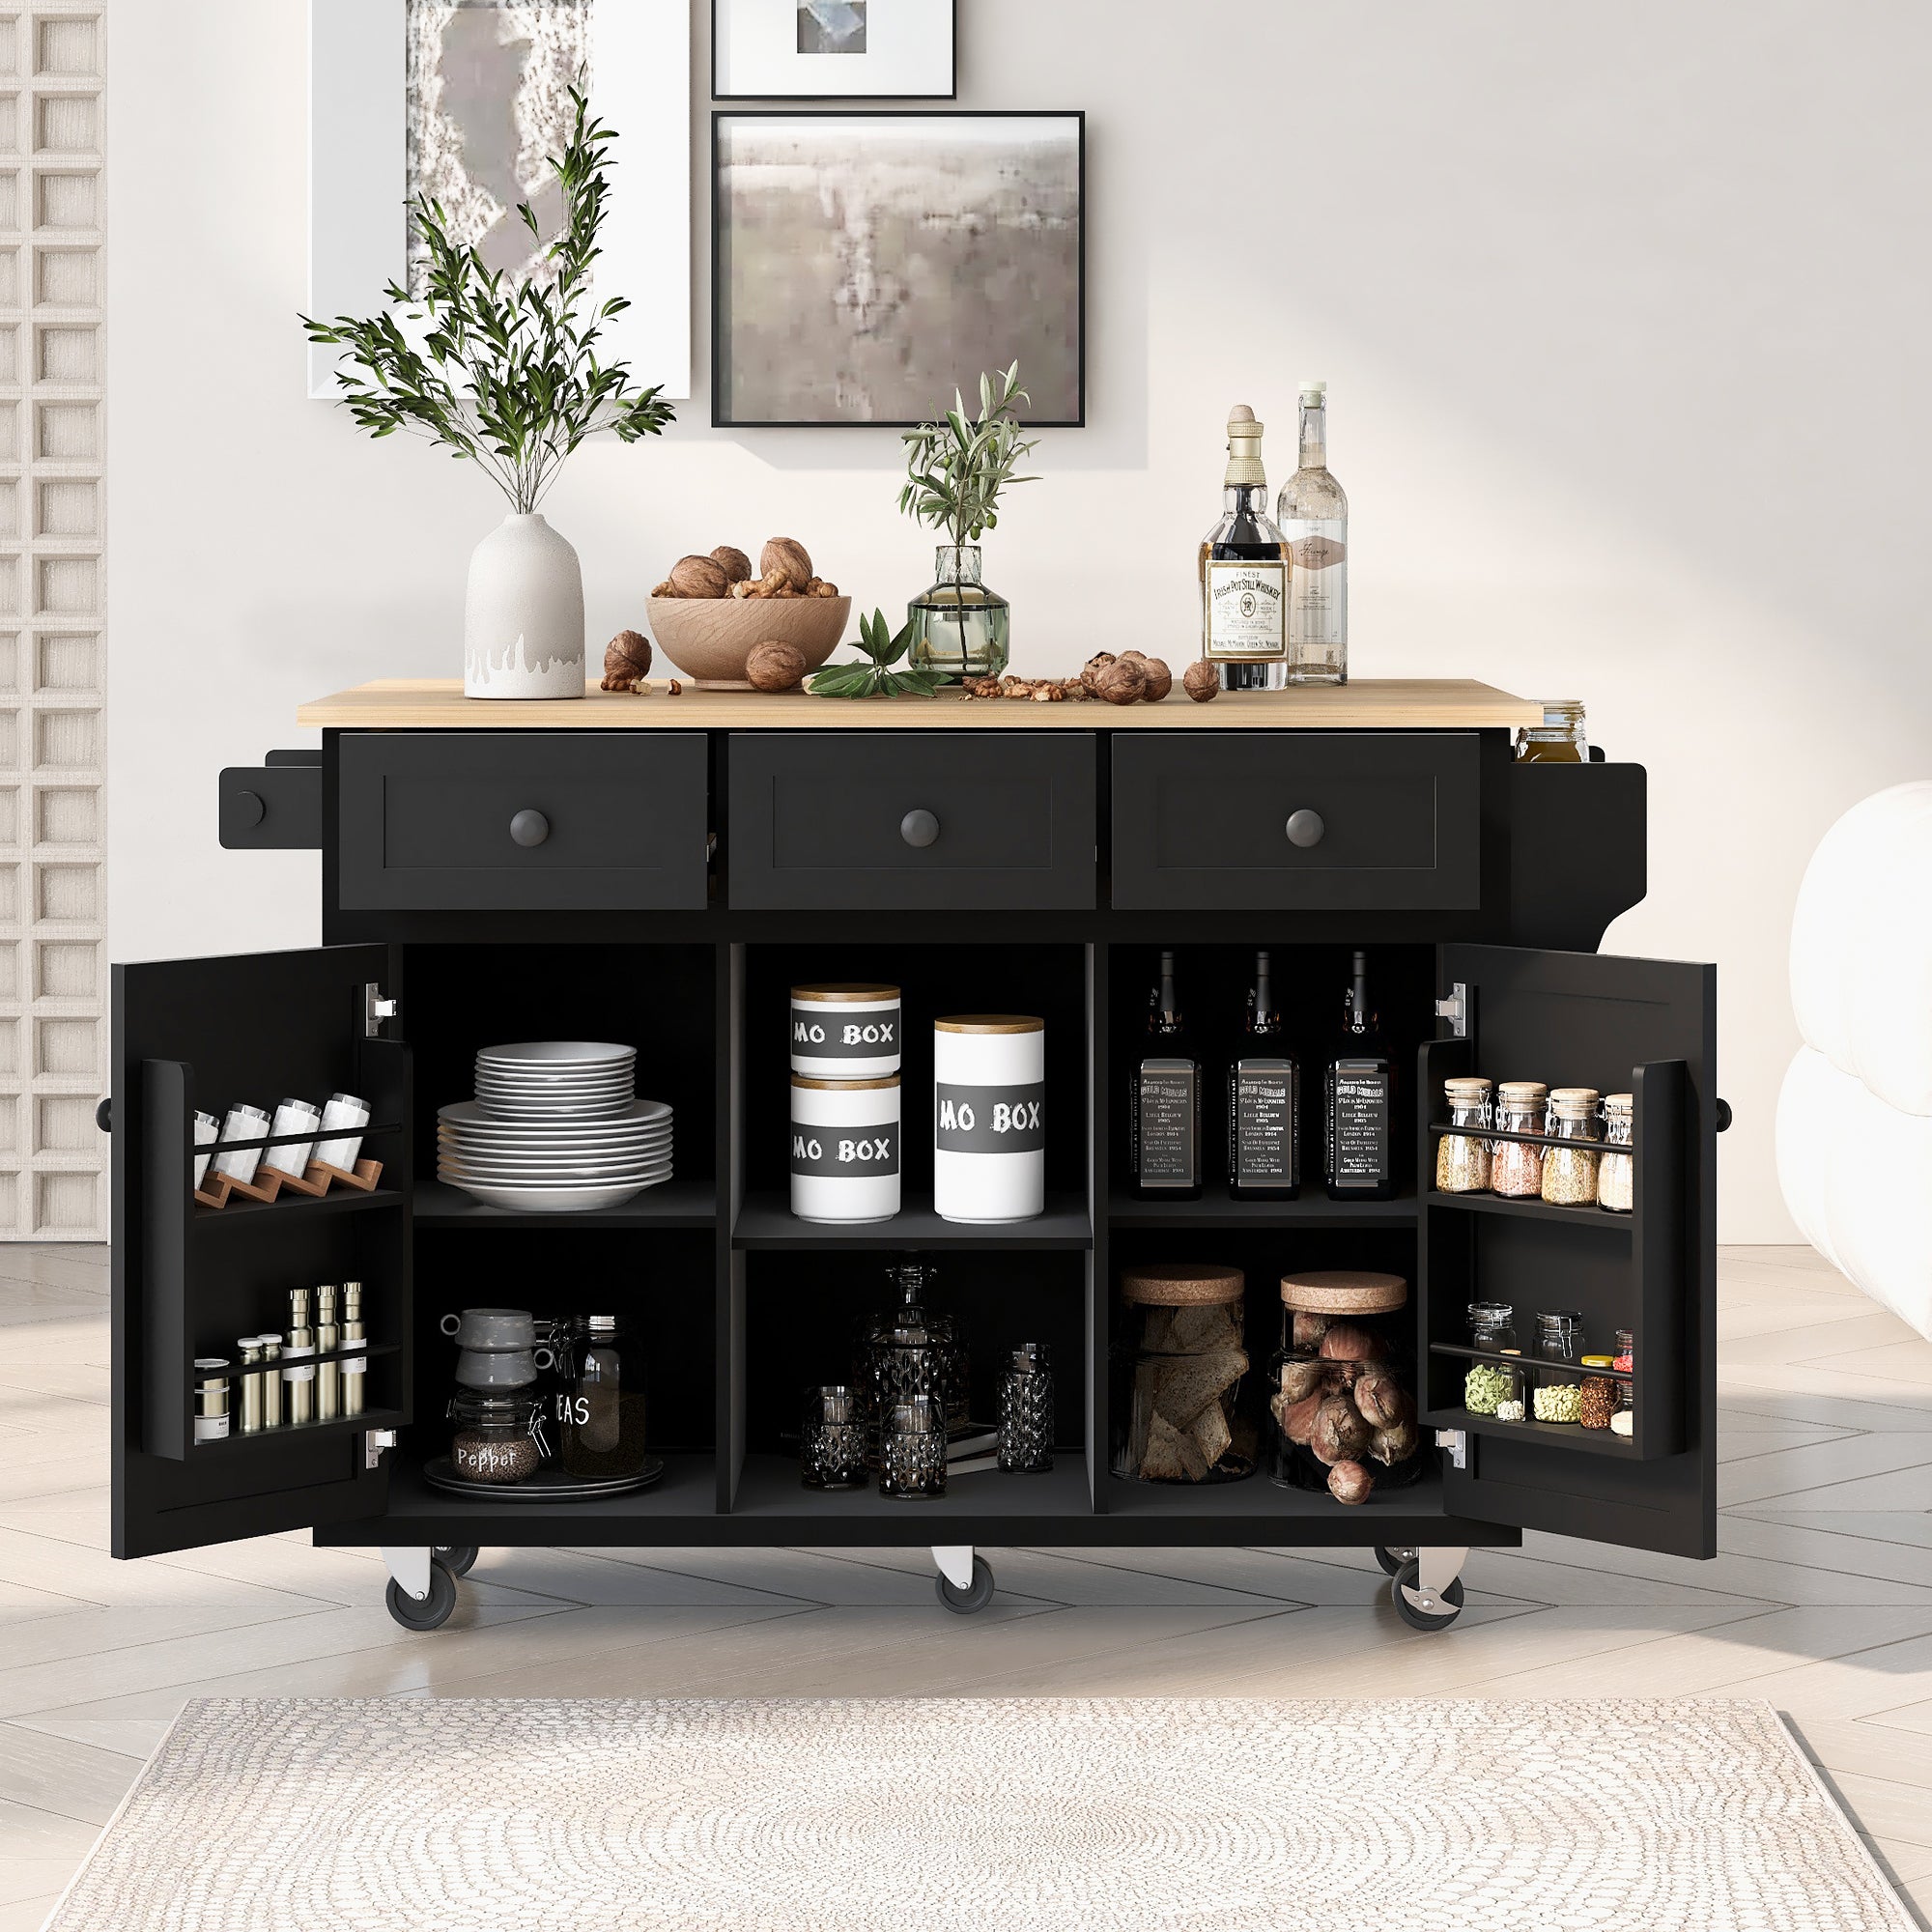 a black kitchen cart with wheels